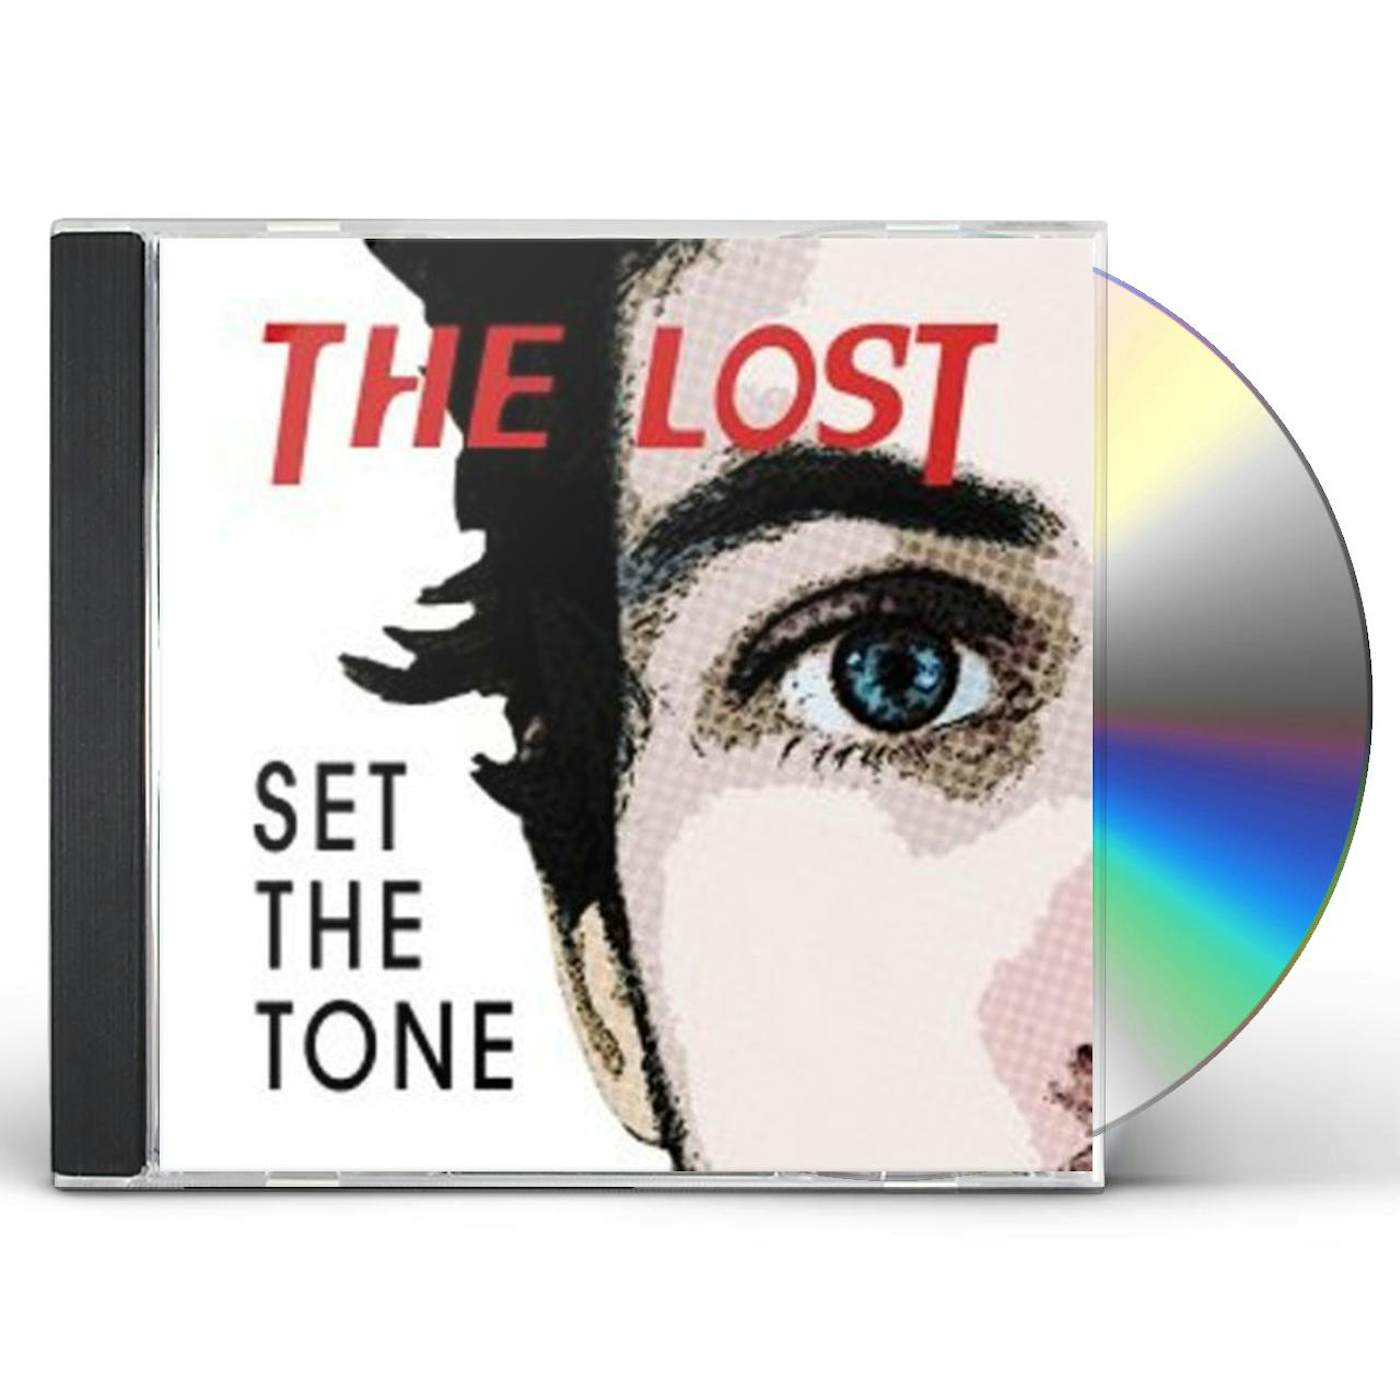 THE LOST SET THE TONE CD